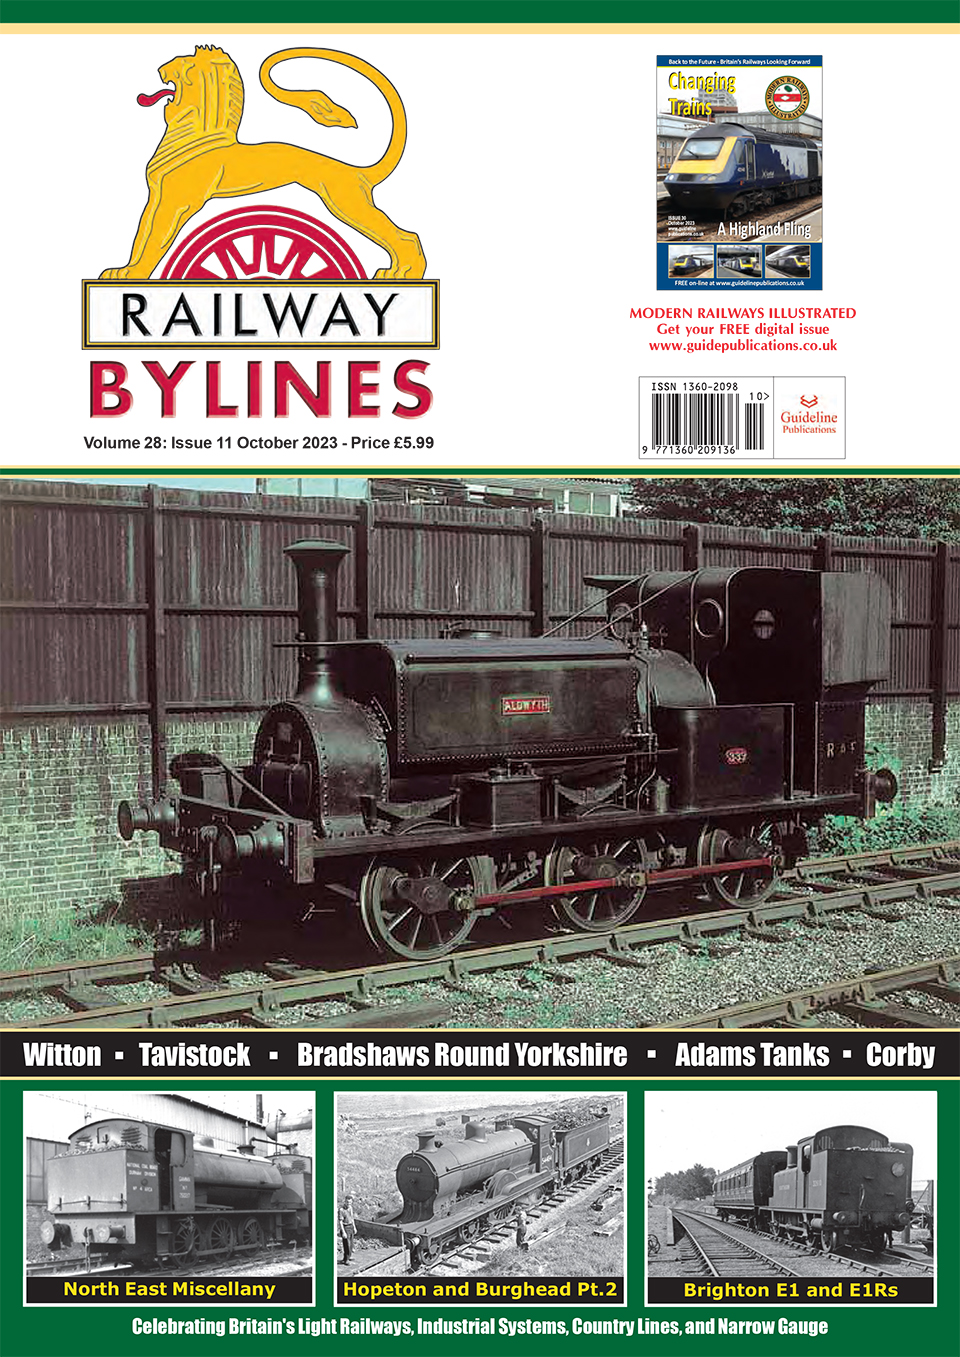 Guideline Publications Ltd Railway Bylines  vol 28 - issue 11 October 23 